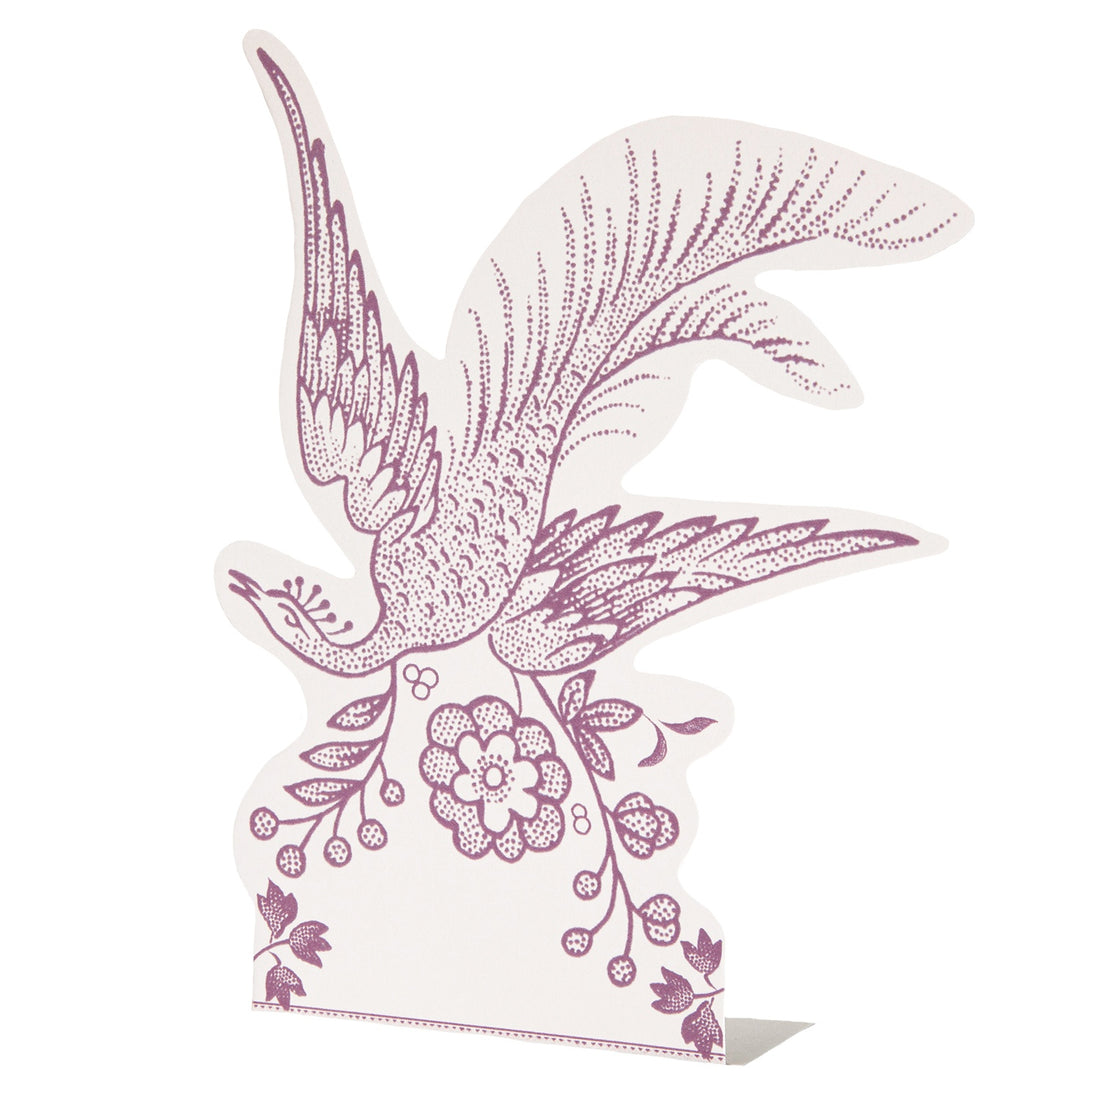 A die-cut, white paper place card that stands upright, featuring a lilac purple bird and floral design with an open space at the bottom, inspired by the ornamental bird pattern from Burleigh.